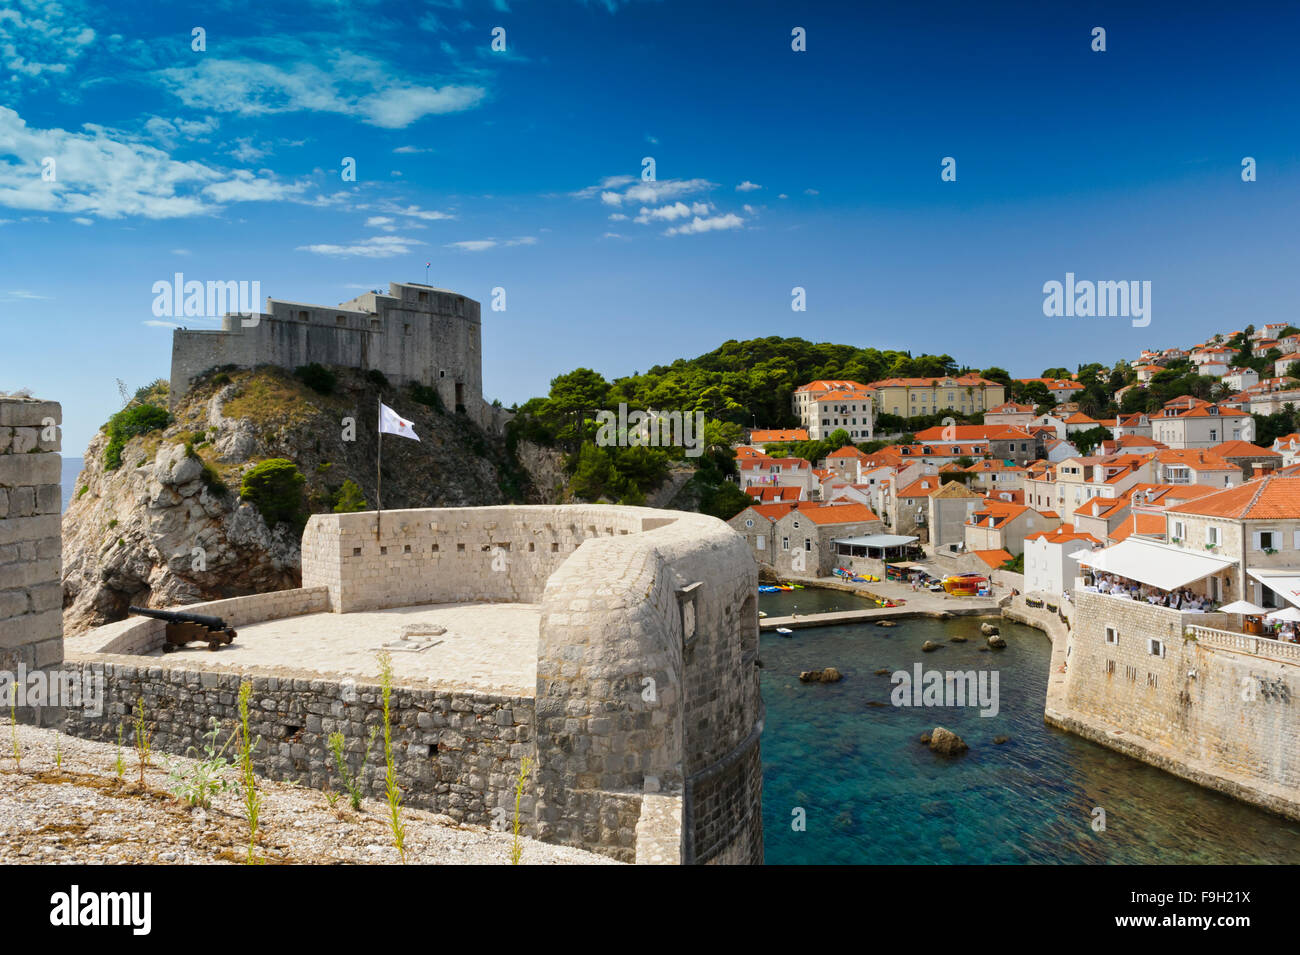 Fort Lovrijenac or St. Lawrence Fortress perch on a huge rock facing the sea, Dubrovnik, Croatia. Stock Photo